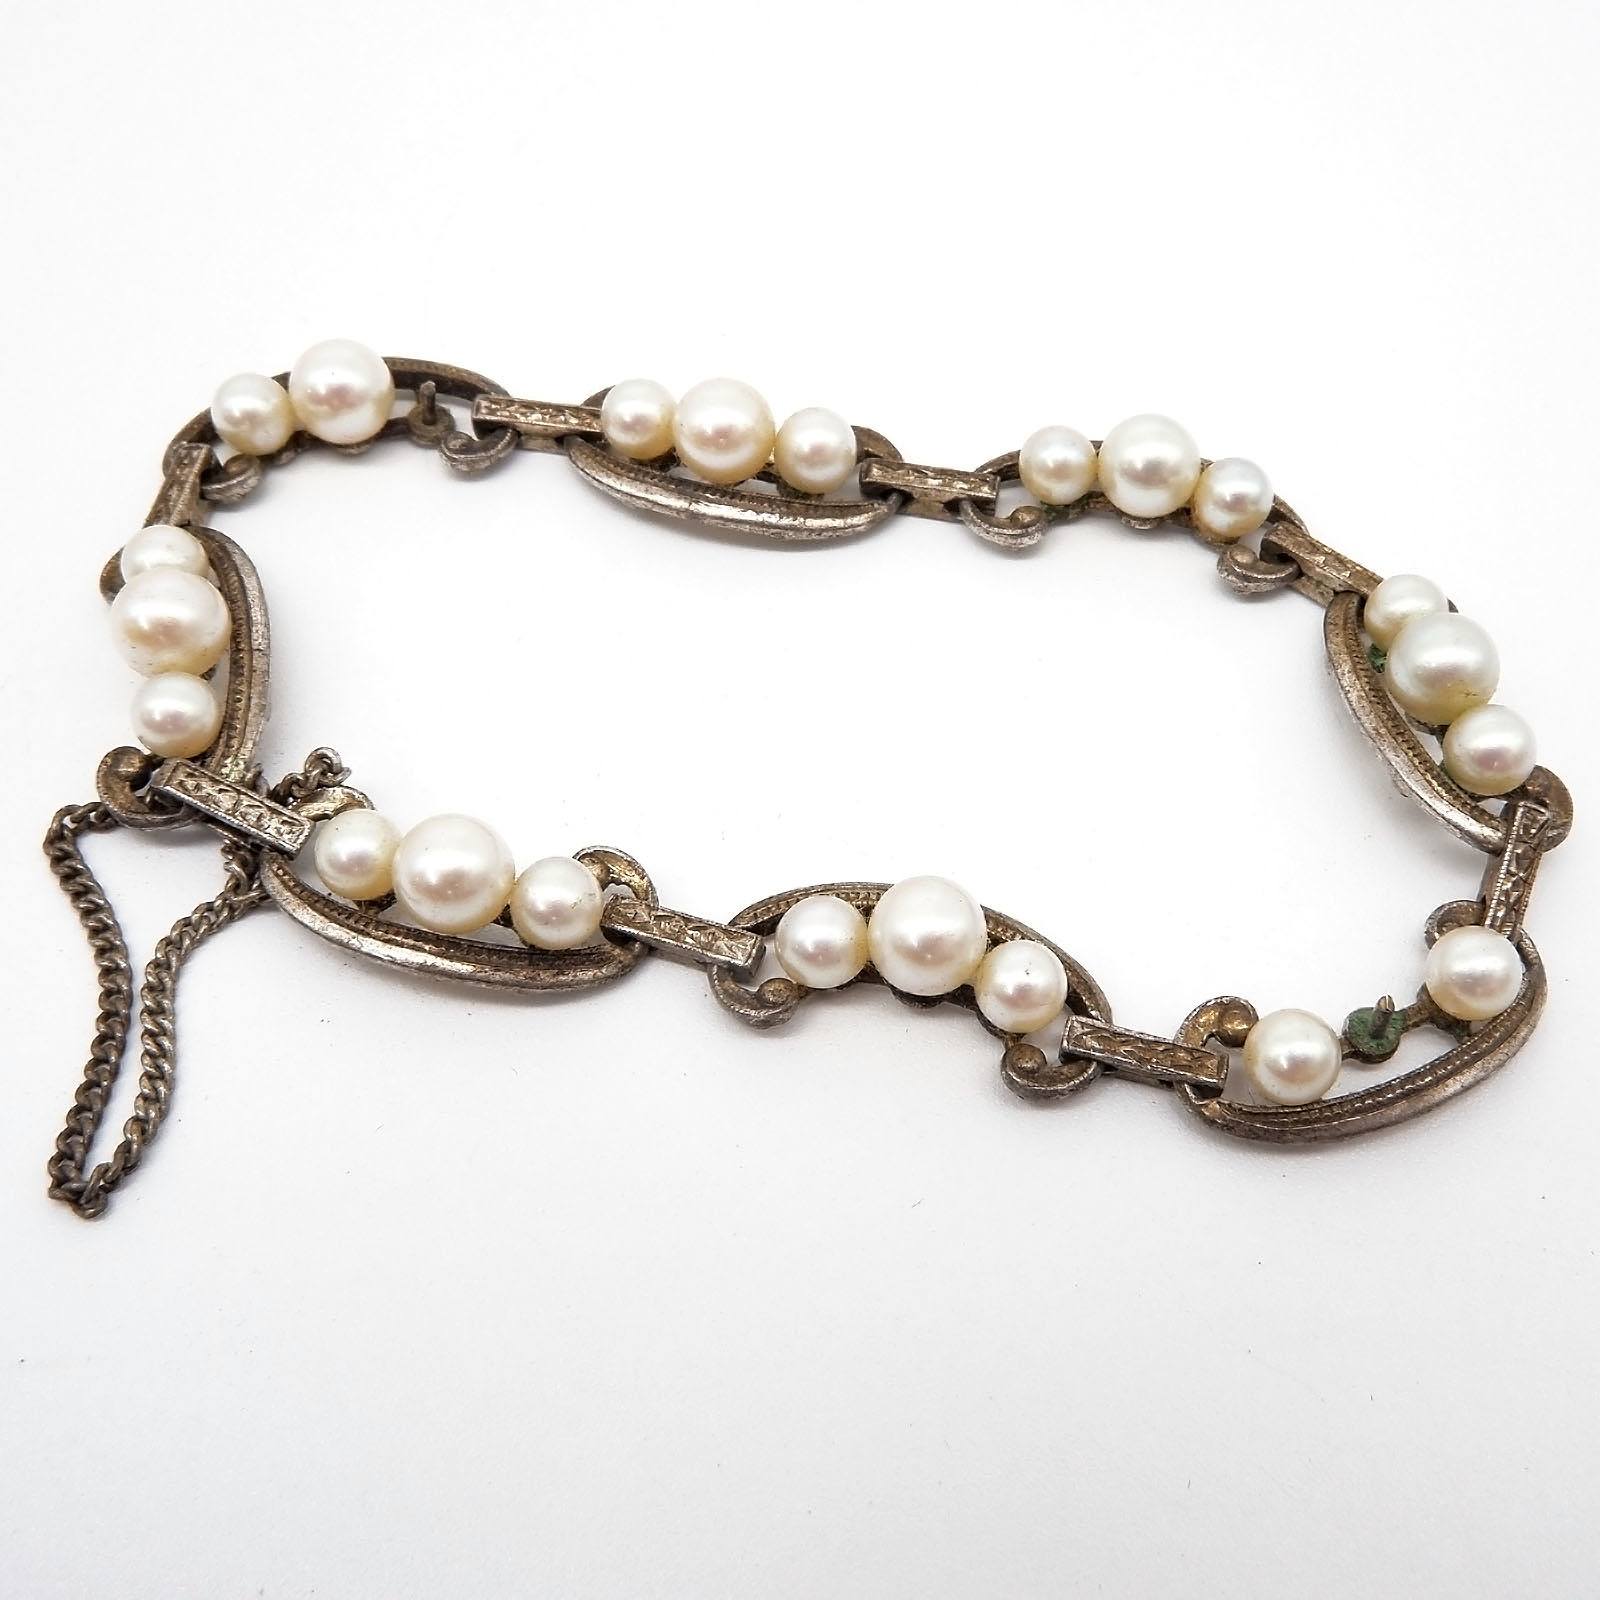 'Sterling Silver Mikimoto Bracelet, Eight Links Each with Three Round Creme White Cultured Pearls'